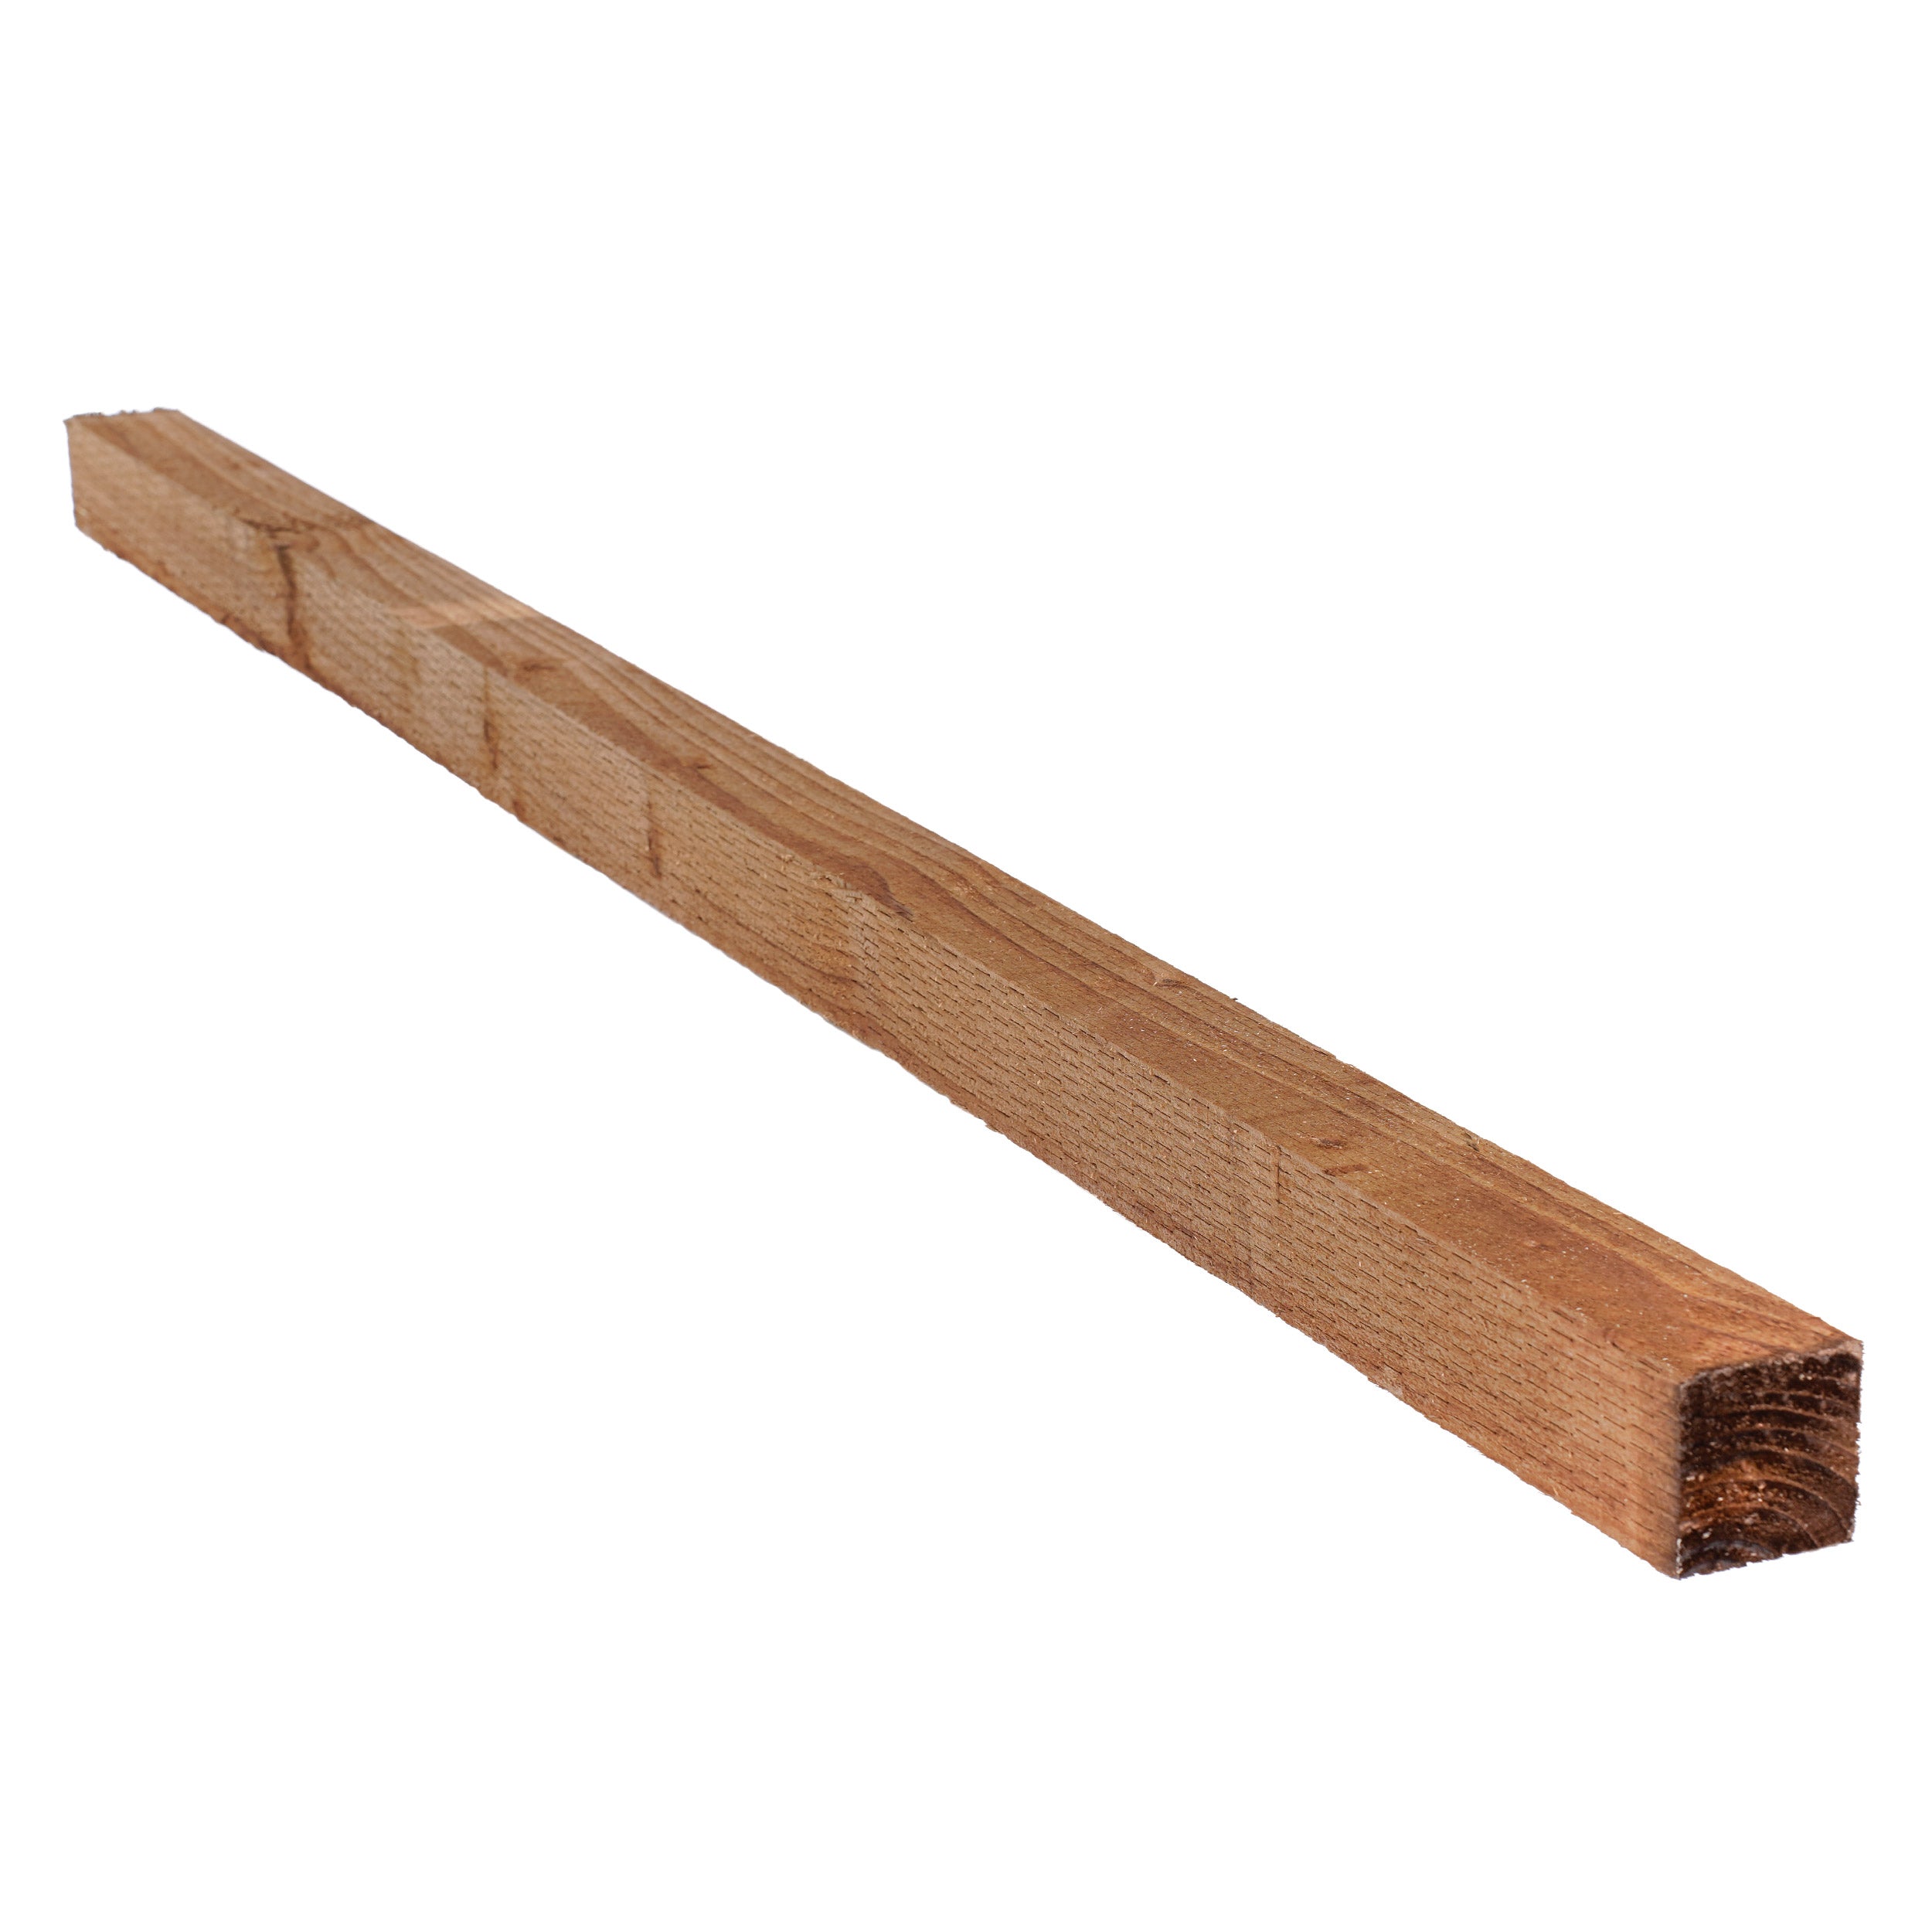 3x3 Timber Fence Post - Pressure Treated Brown